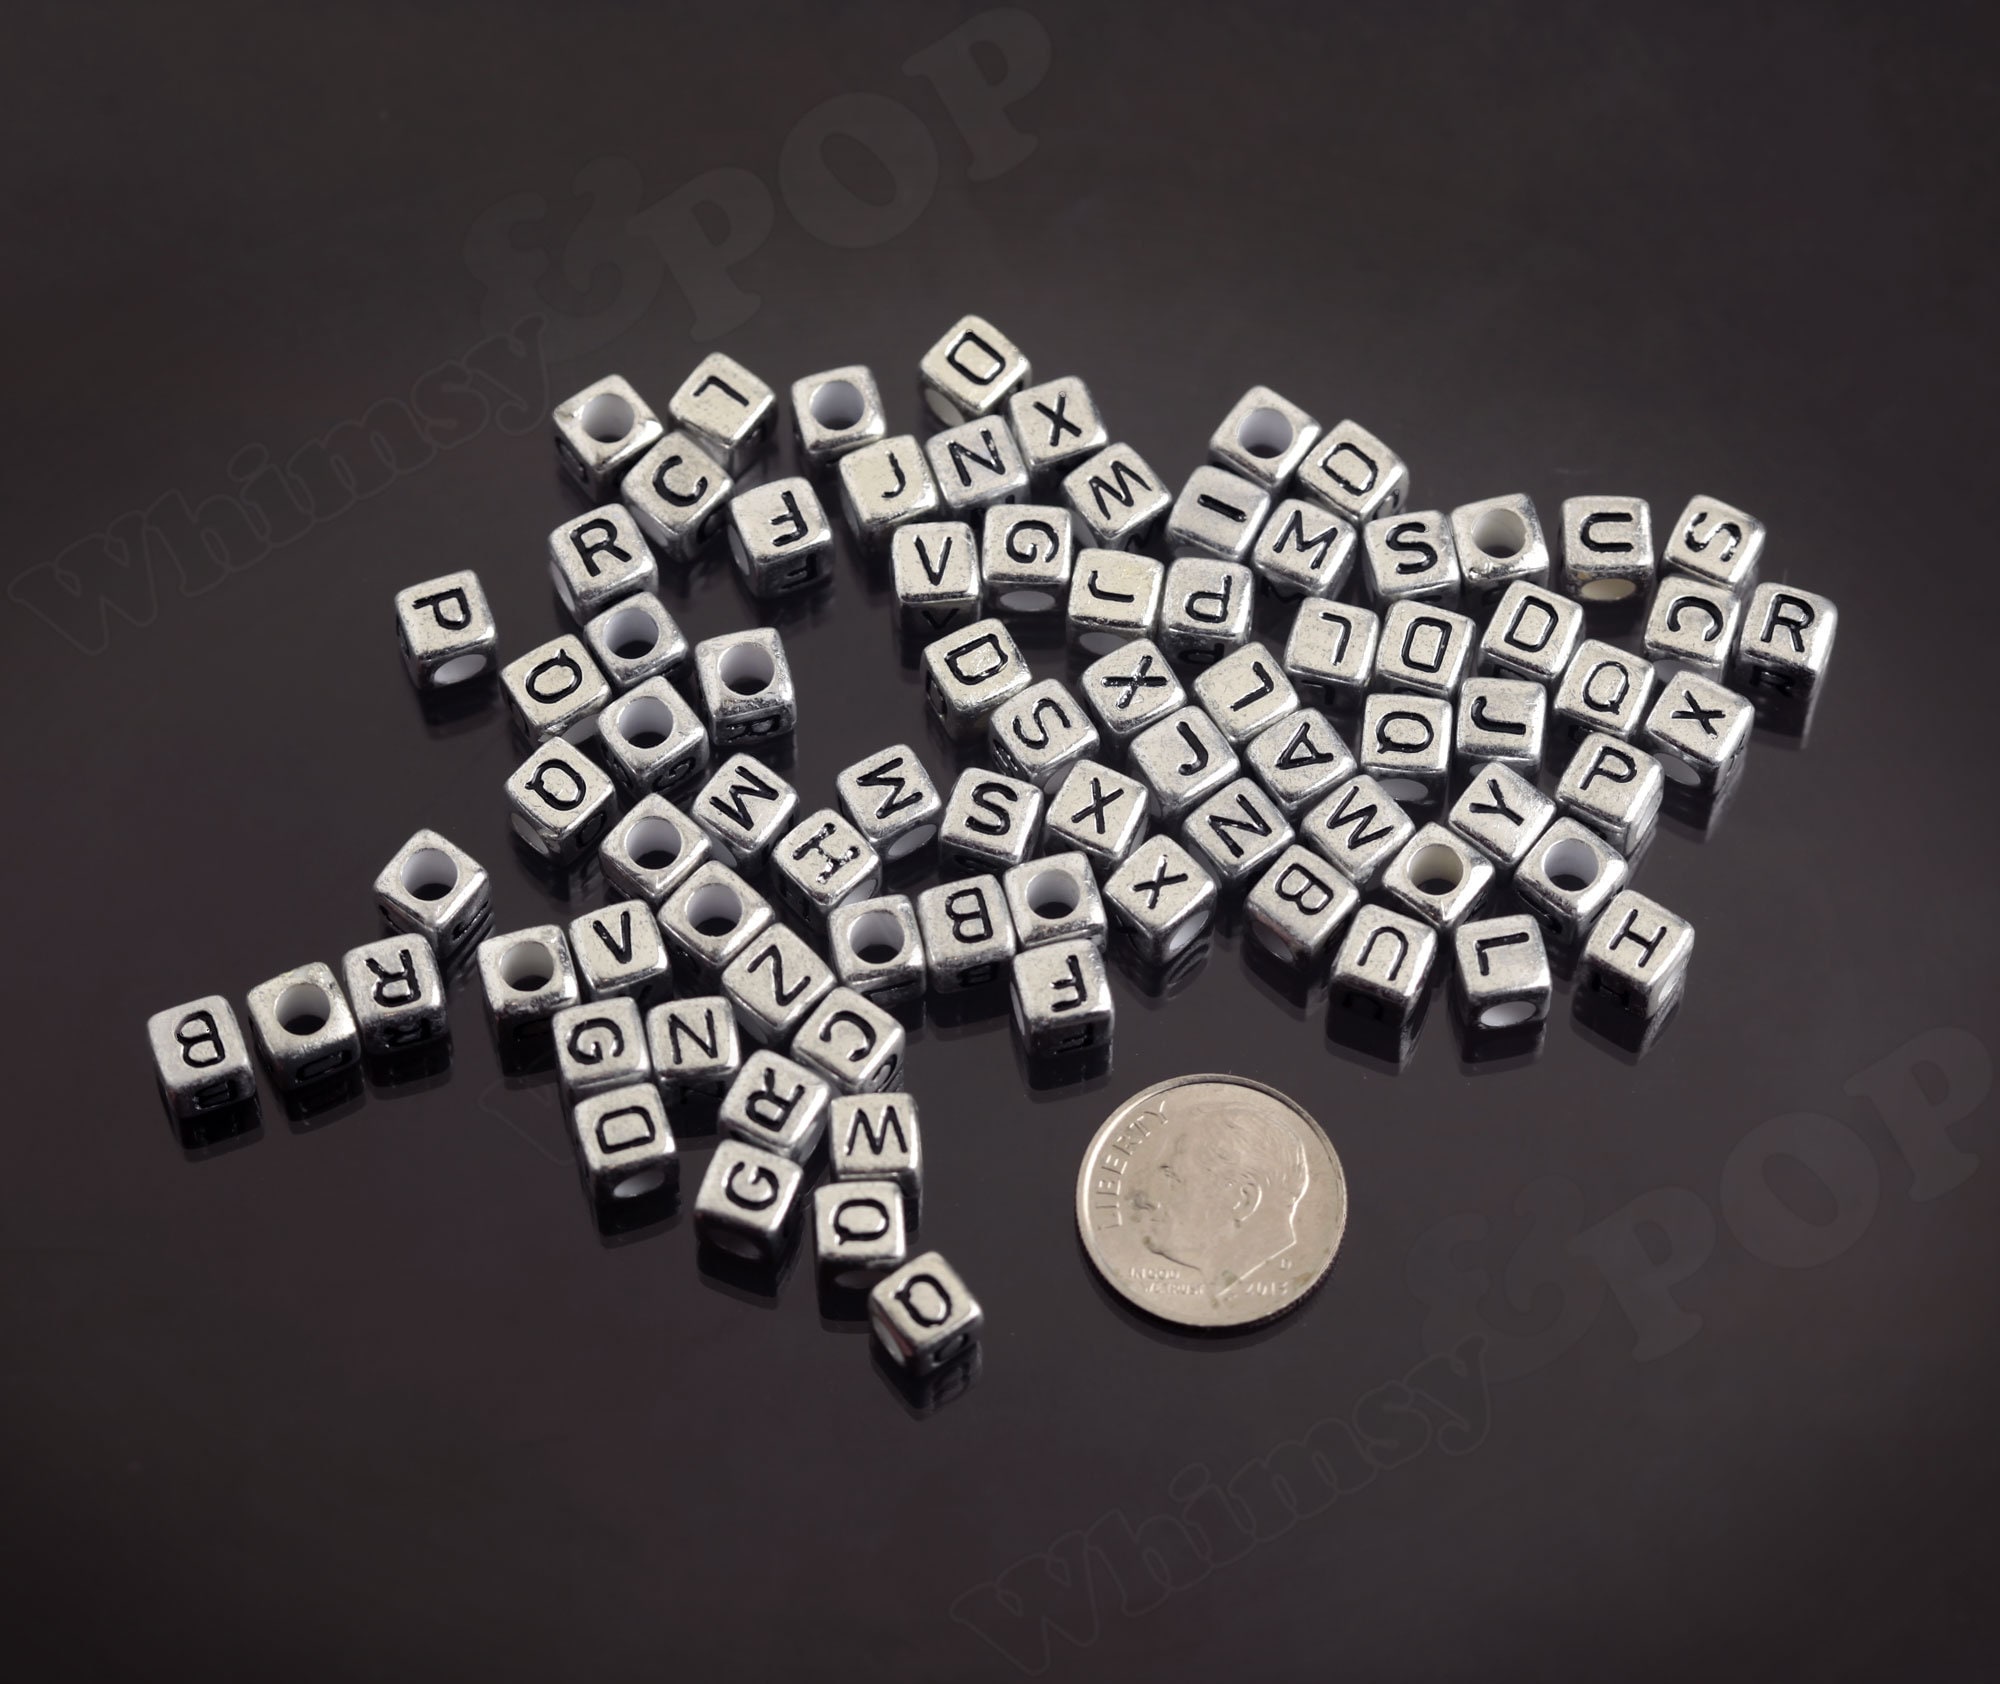 Cheriswelry 934pcs/box 6mm White Acrylic Cube AZ Letter Alphabet Beads  Sorted Square Plastic Letter Pony Beads for DIY Bracelet Necklace Jewelry